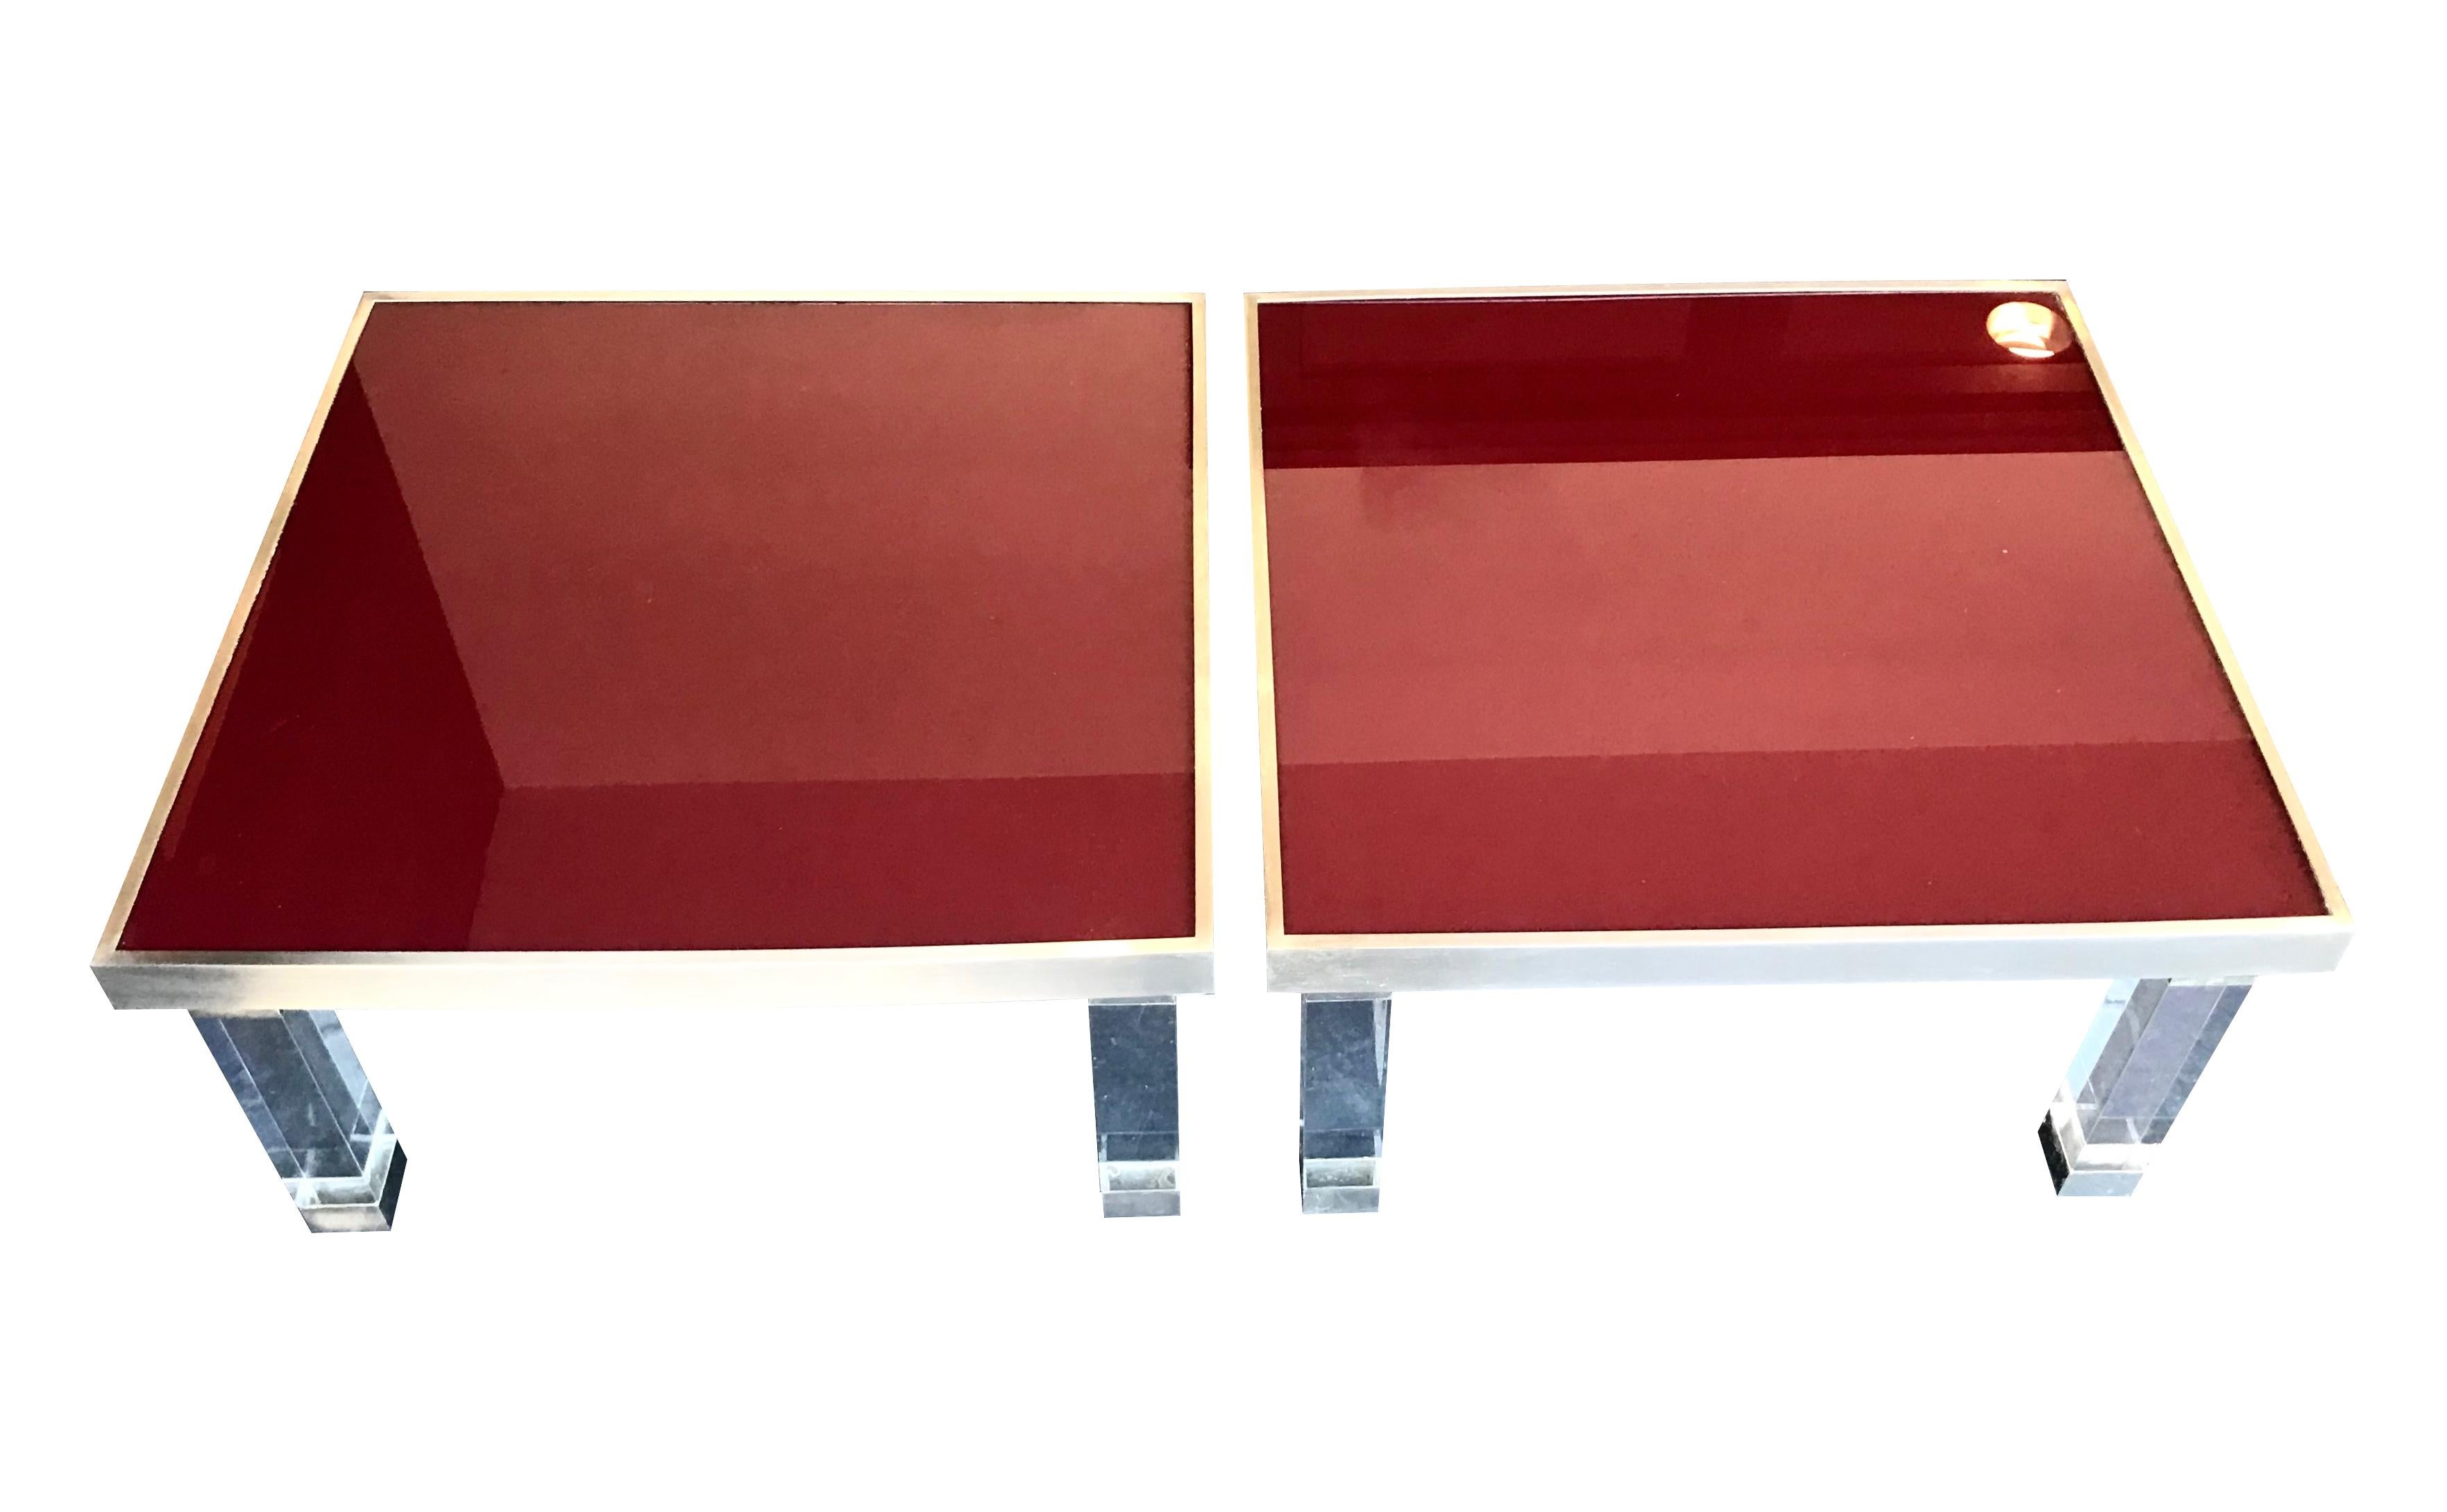 A fabulous pair of 1970s red glass topped topped side tables with solid lucite legs with brushed metal edging and feet. 